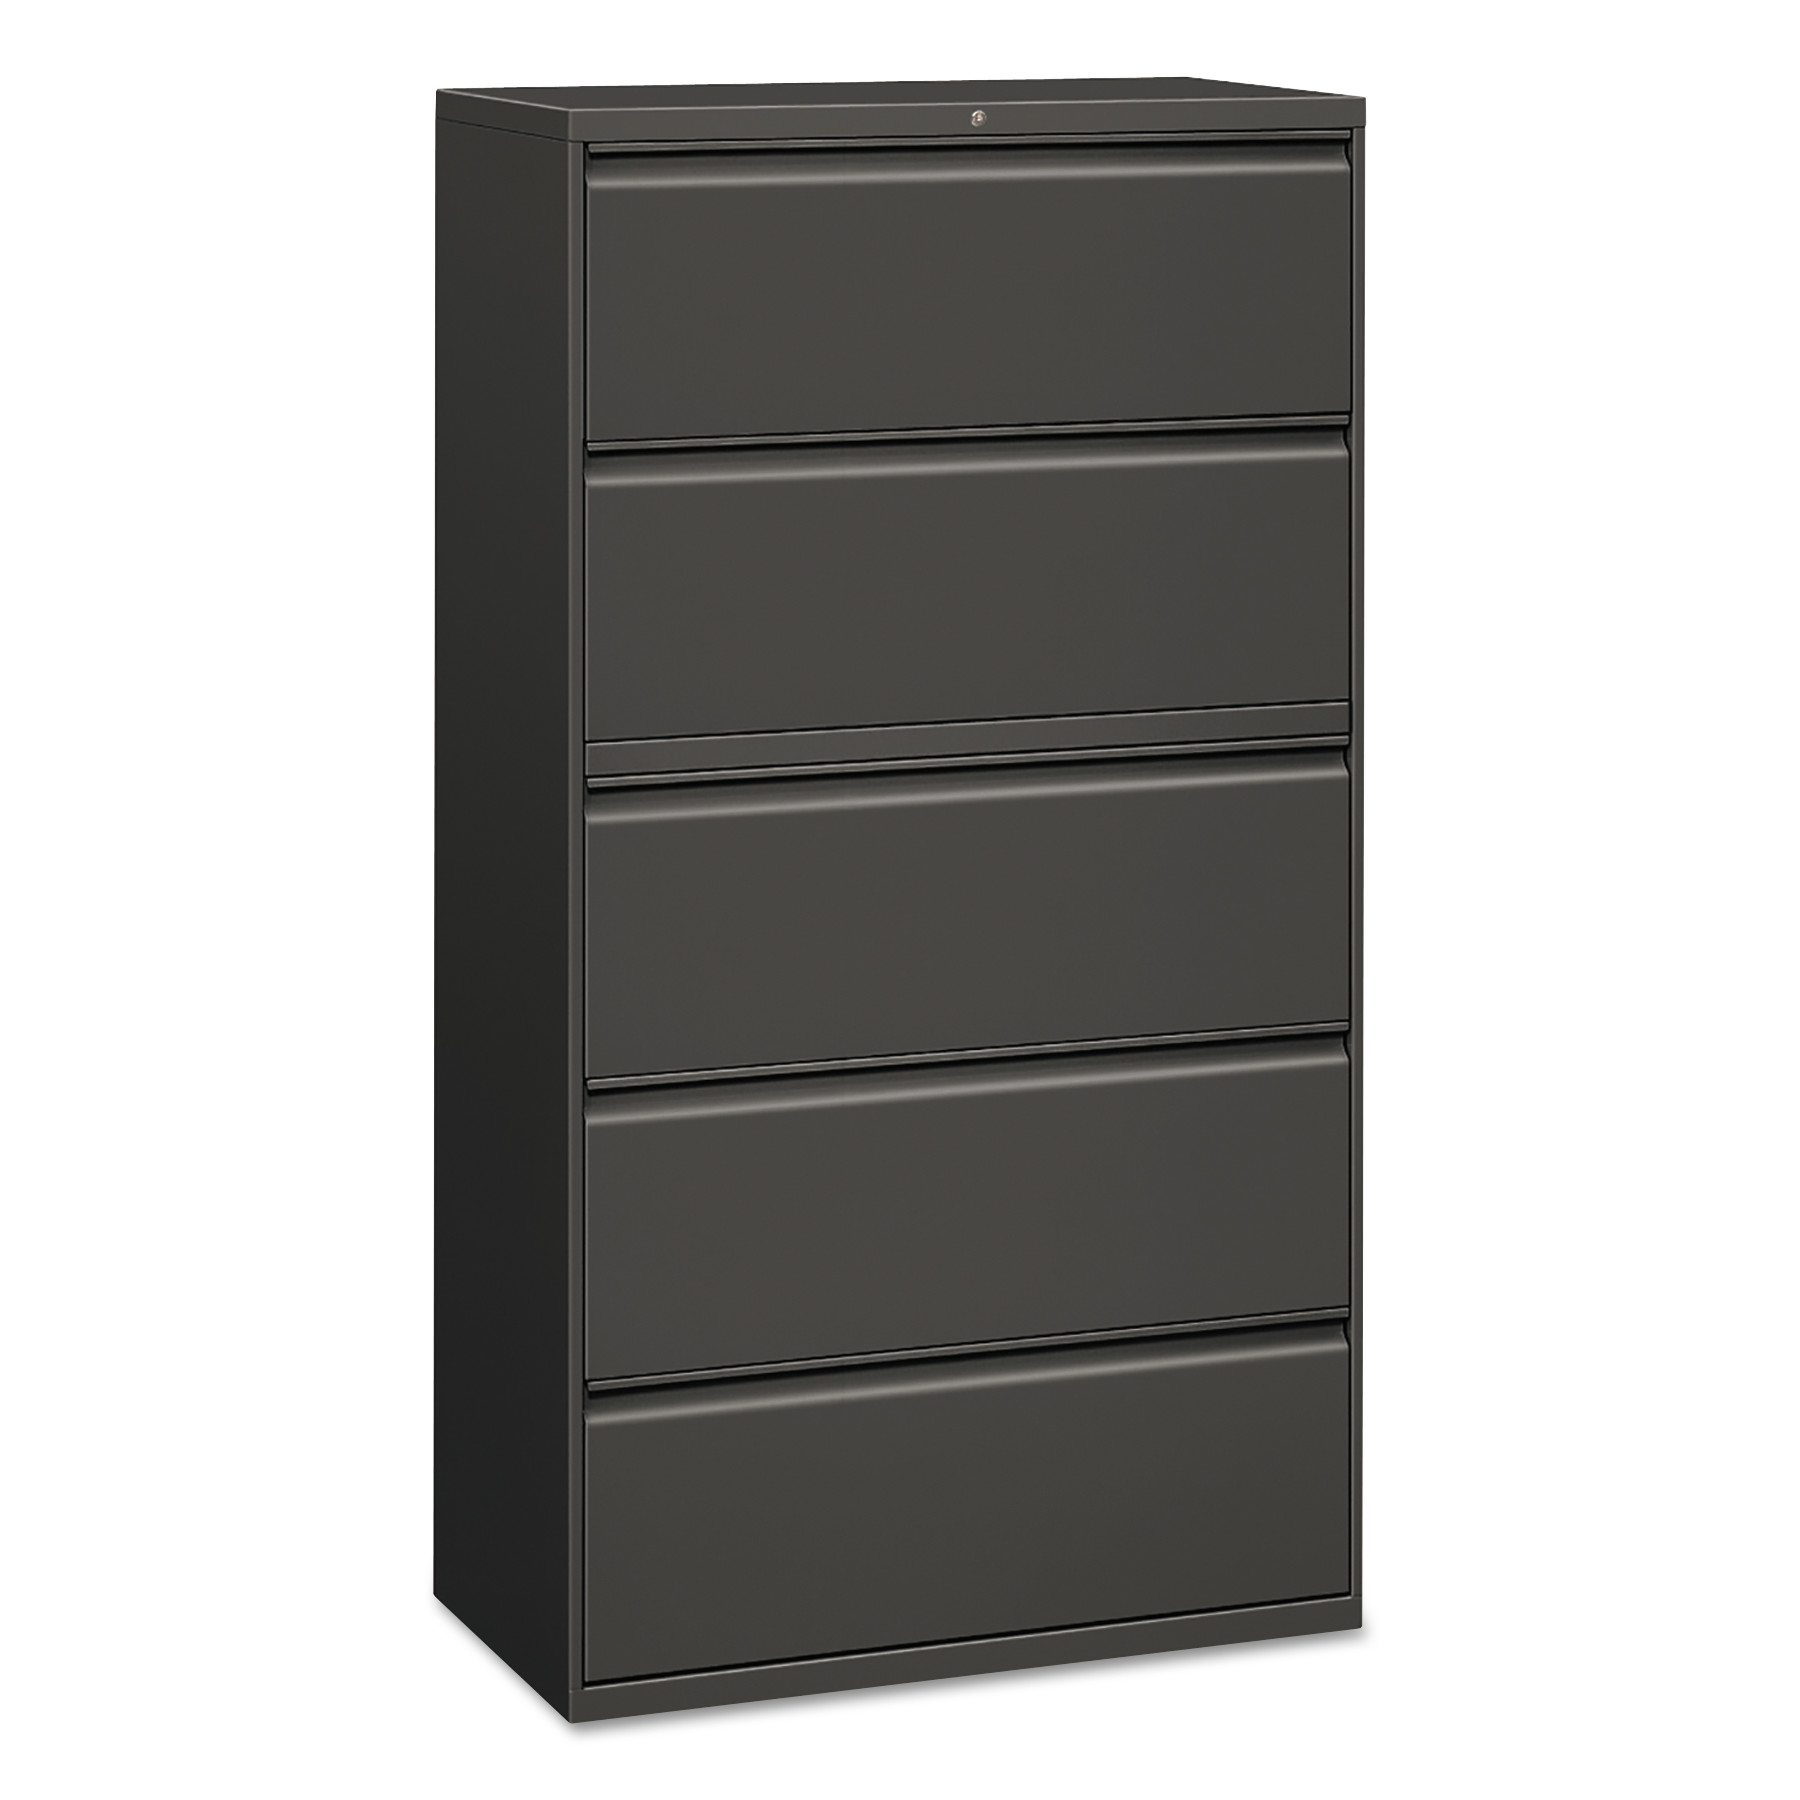 Alera Lateral File, 5 Drawer, 36w x 19.25d x 67h, Charcoal - image 2 of 2